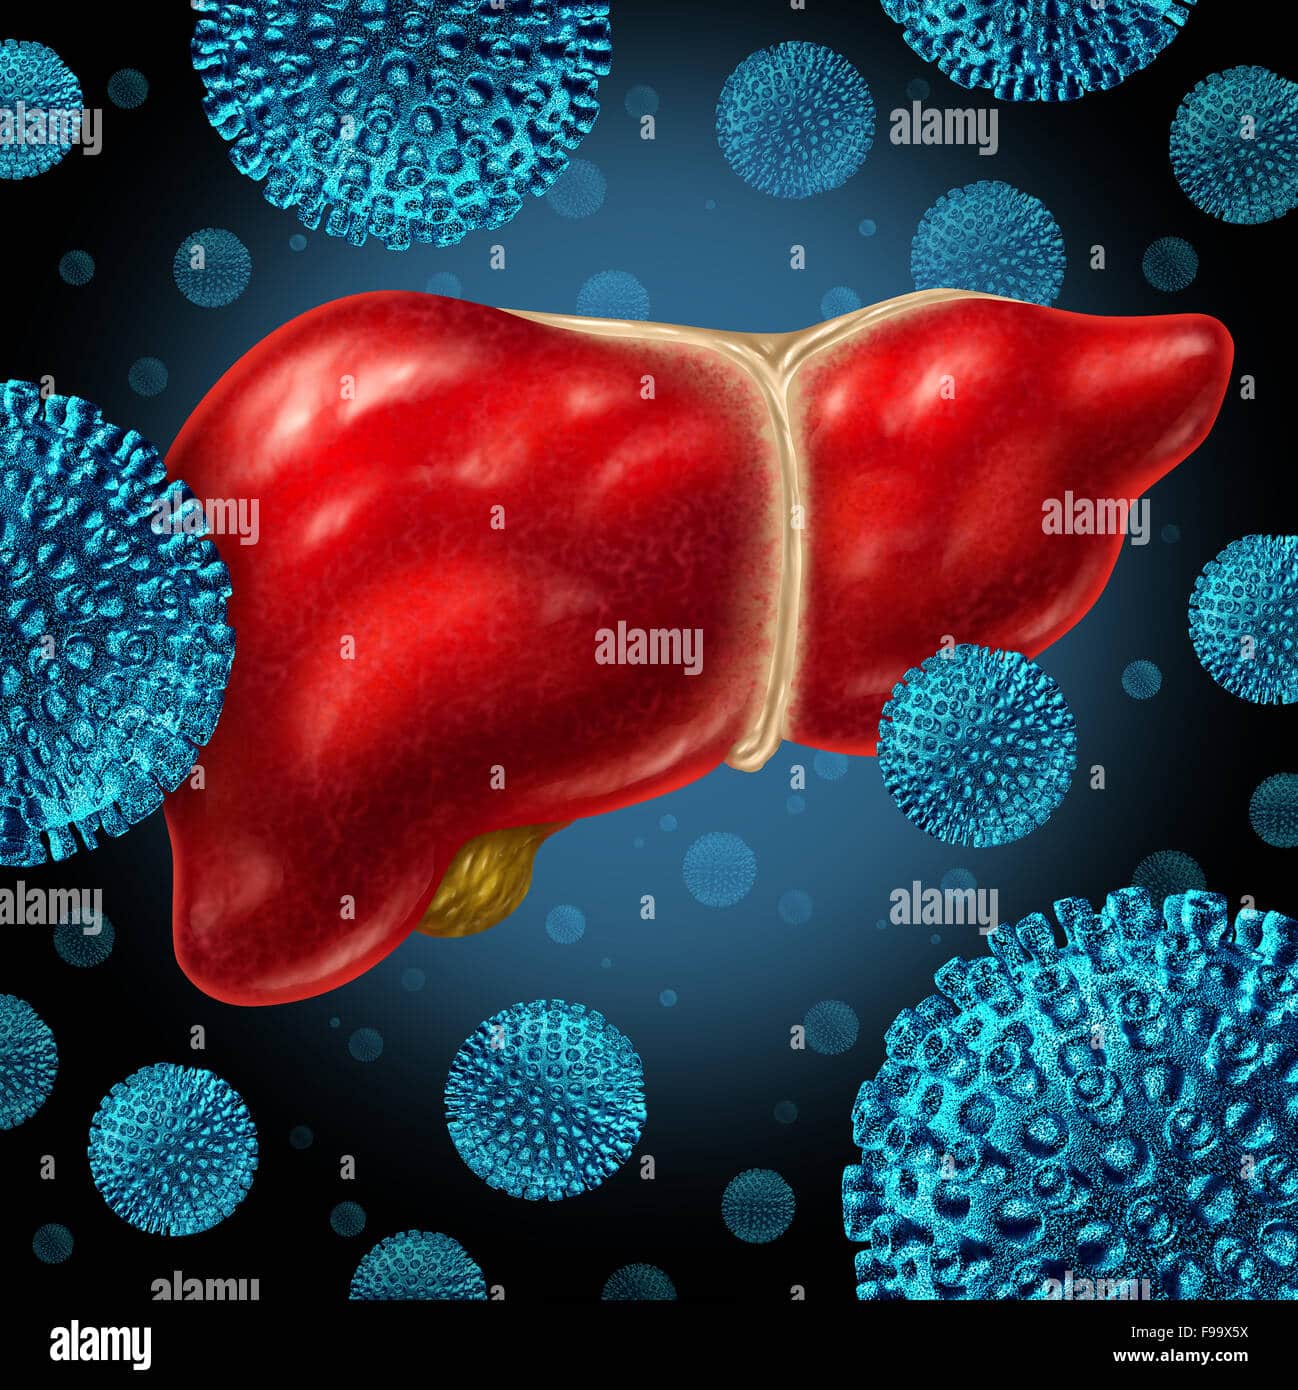 Liver Infection As A Human Liver Infected By The Hepatitis Virus As A ...